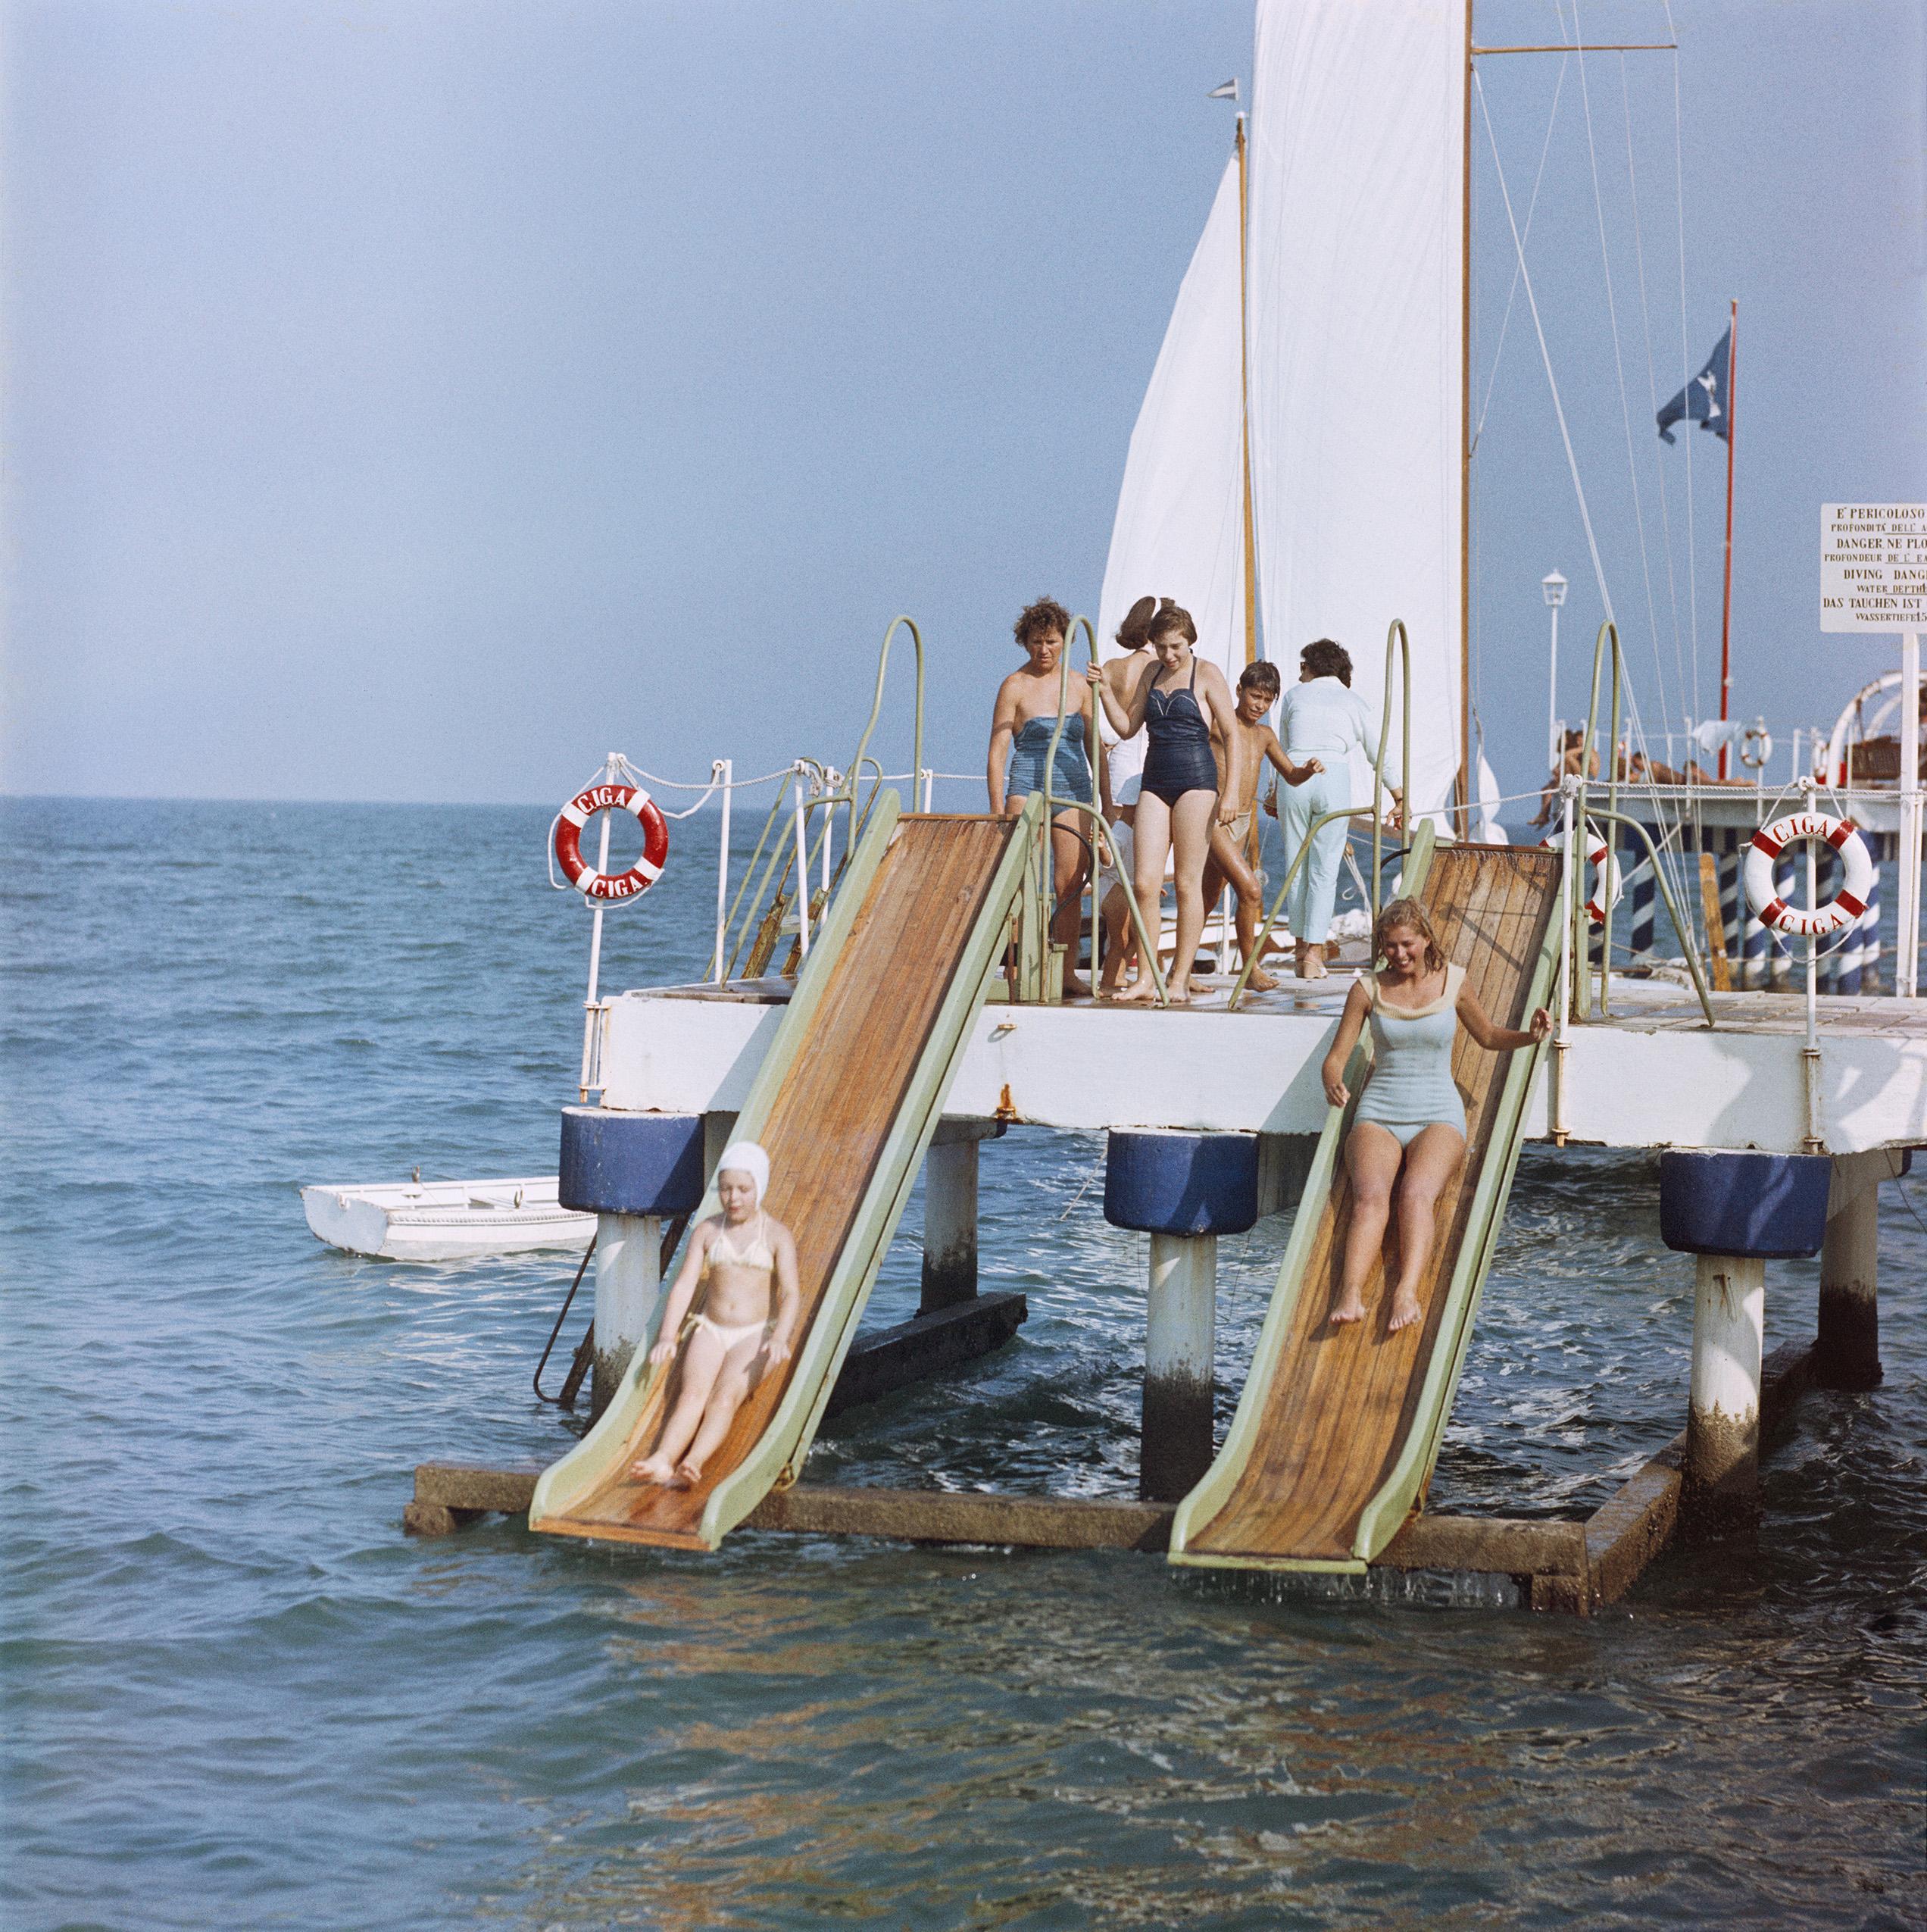 Holidaymakers on the pier at the Lido in Venice, 1957. (Photo by Slim Aarons/Getty Images)

Slim Aarons
Venice Vacation
Chromogenic Lambda print
1957, Printed Later
Slim Aarons Estate Edition
Complimentary dealer shipping to your framer,